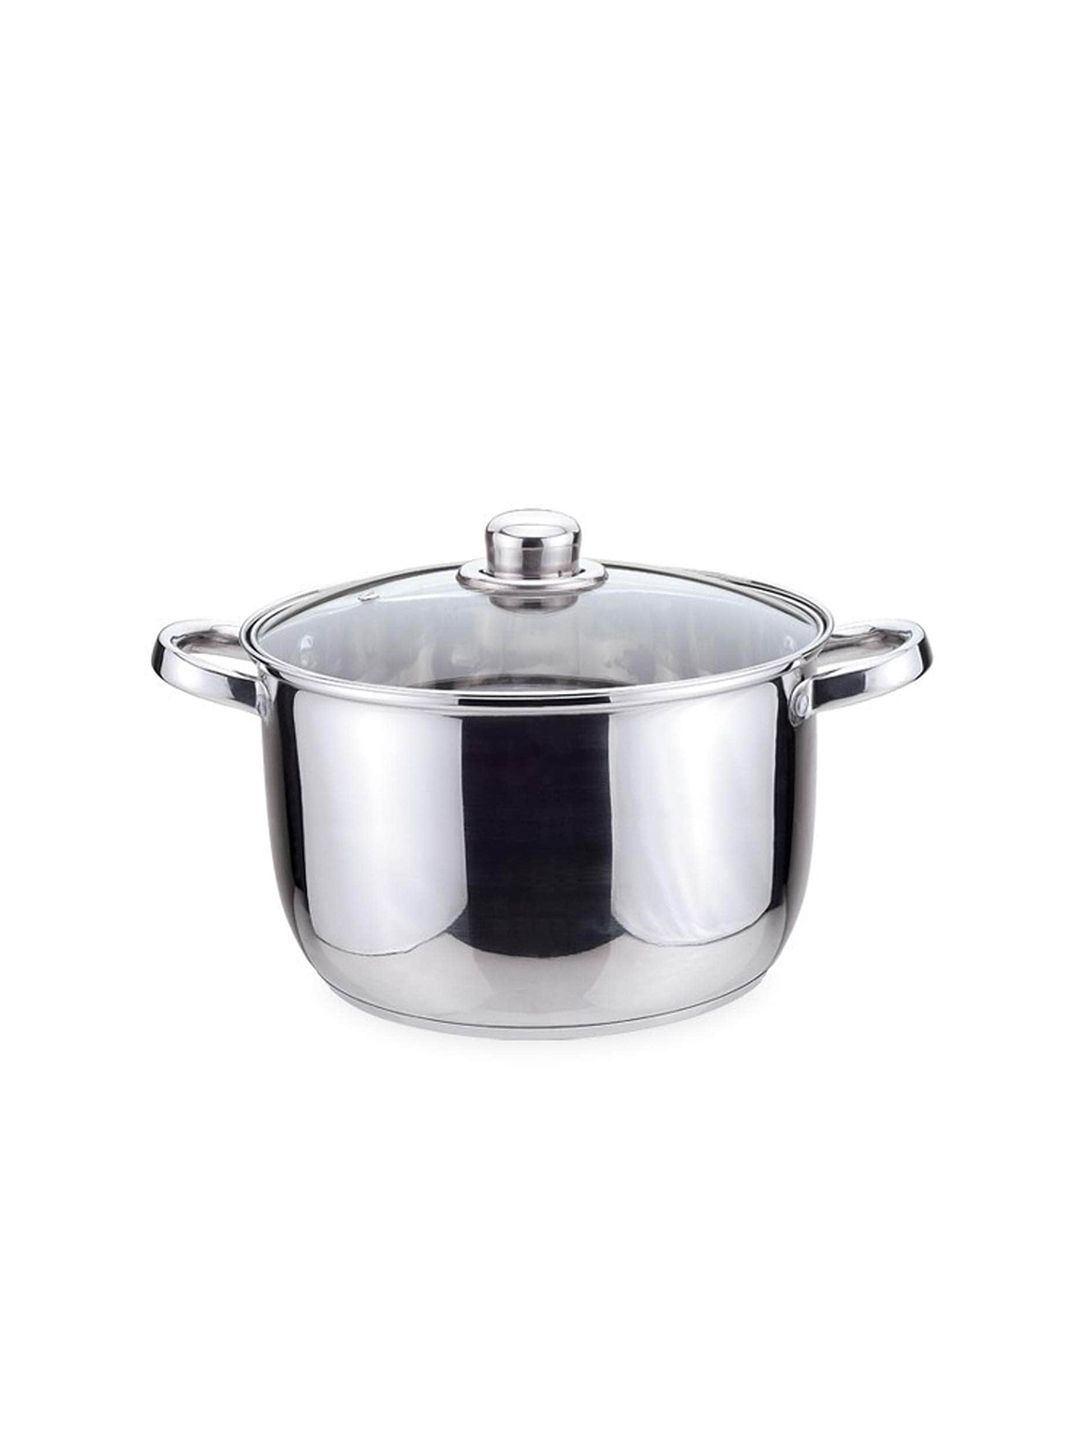 Sabichi Silver-Toned Solid Stainless Steal Sauce Pan With Lid - 5.5L Price in India